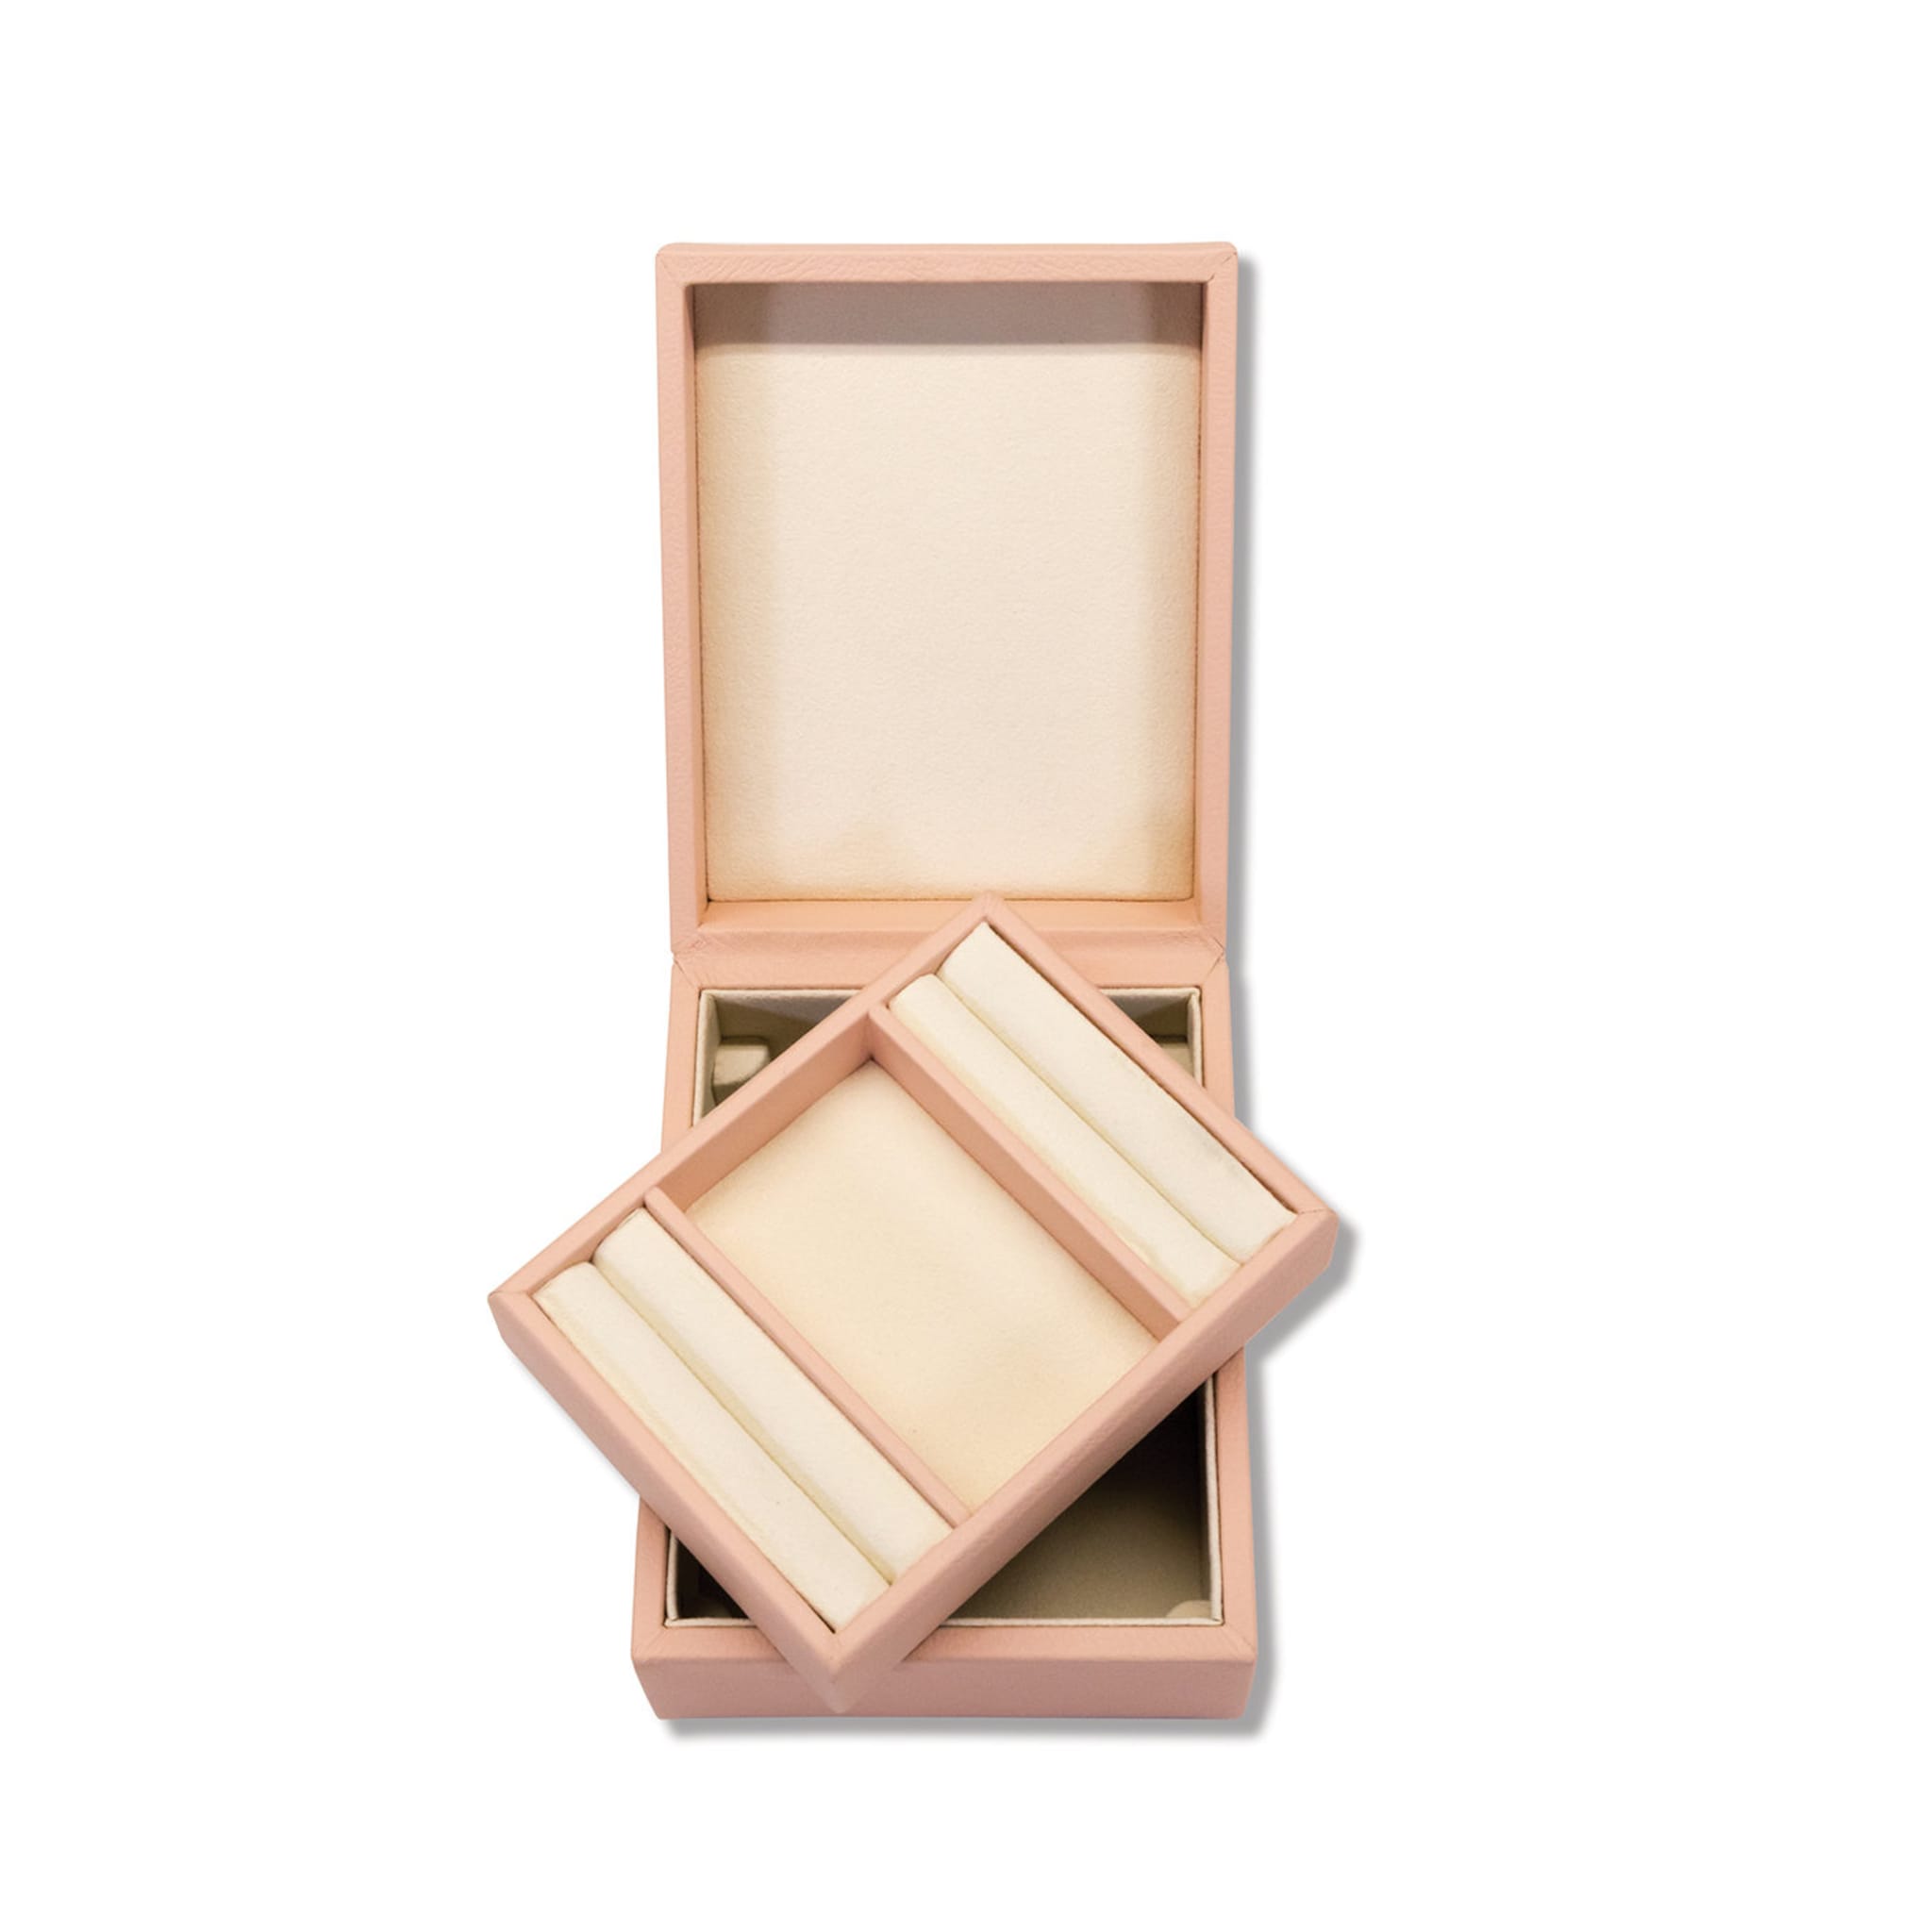 Arc Jewelry Box with Removable Tray - Alternative view 2